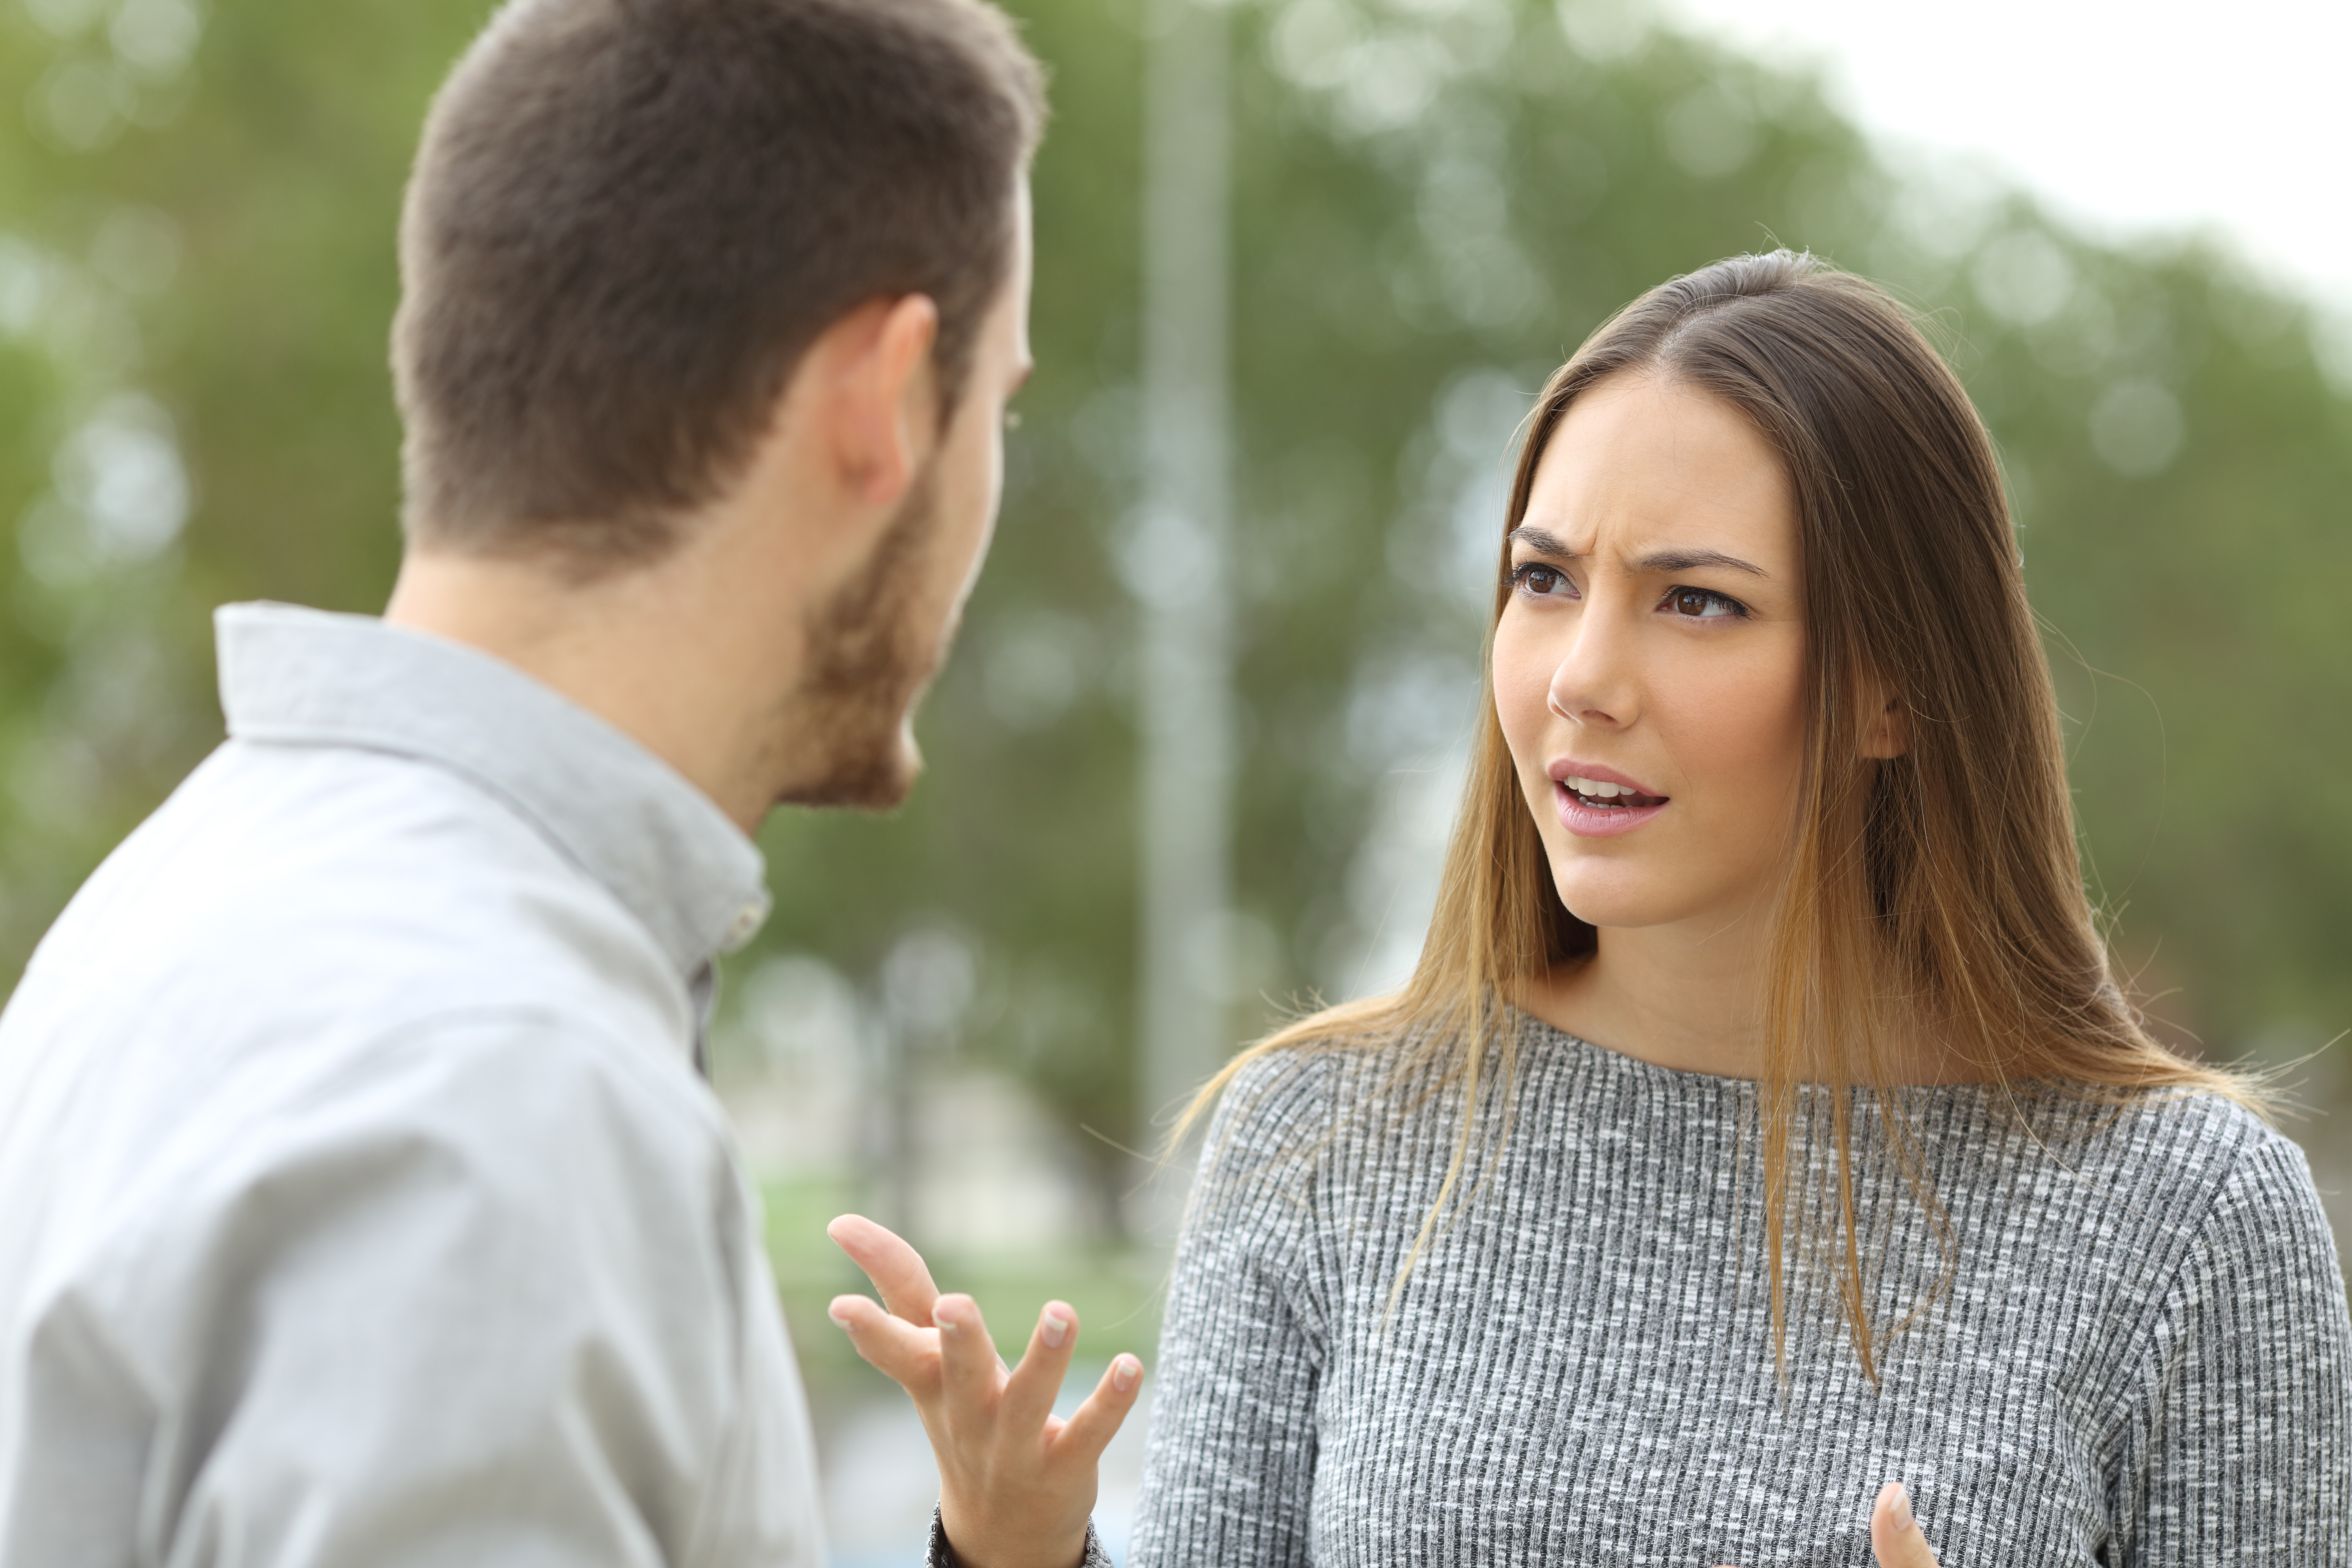 A woman arguing with a man | Source: Shutterstock